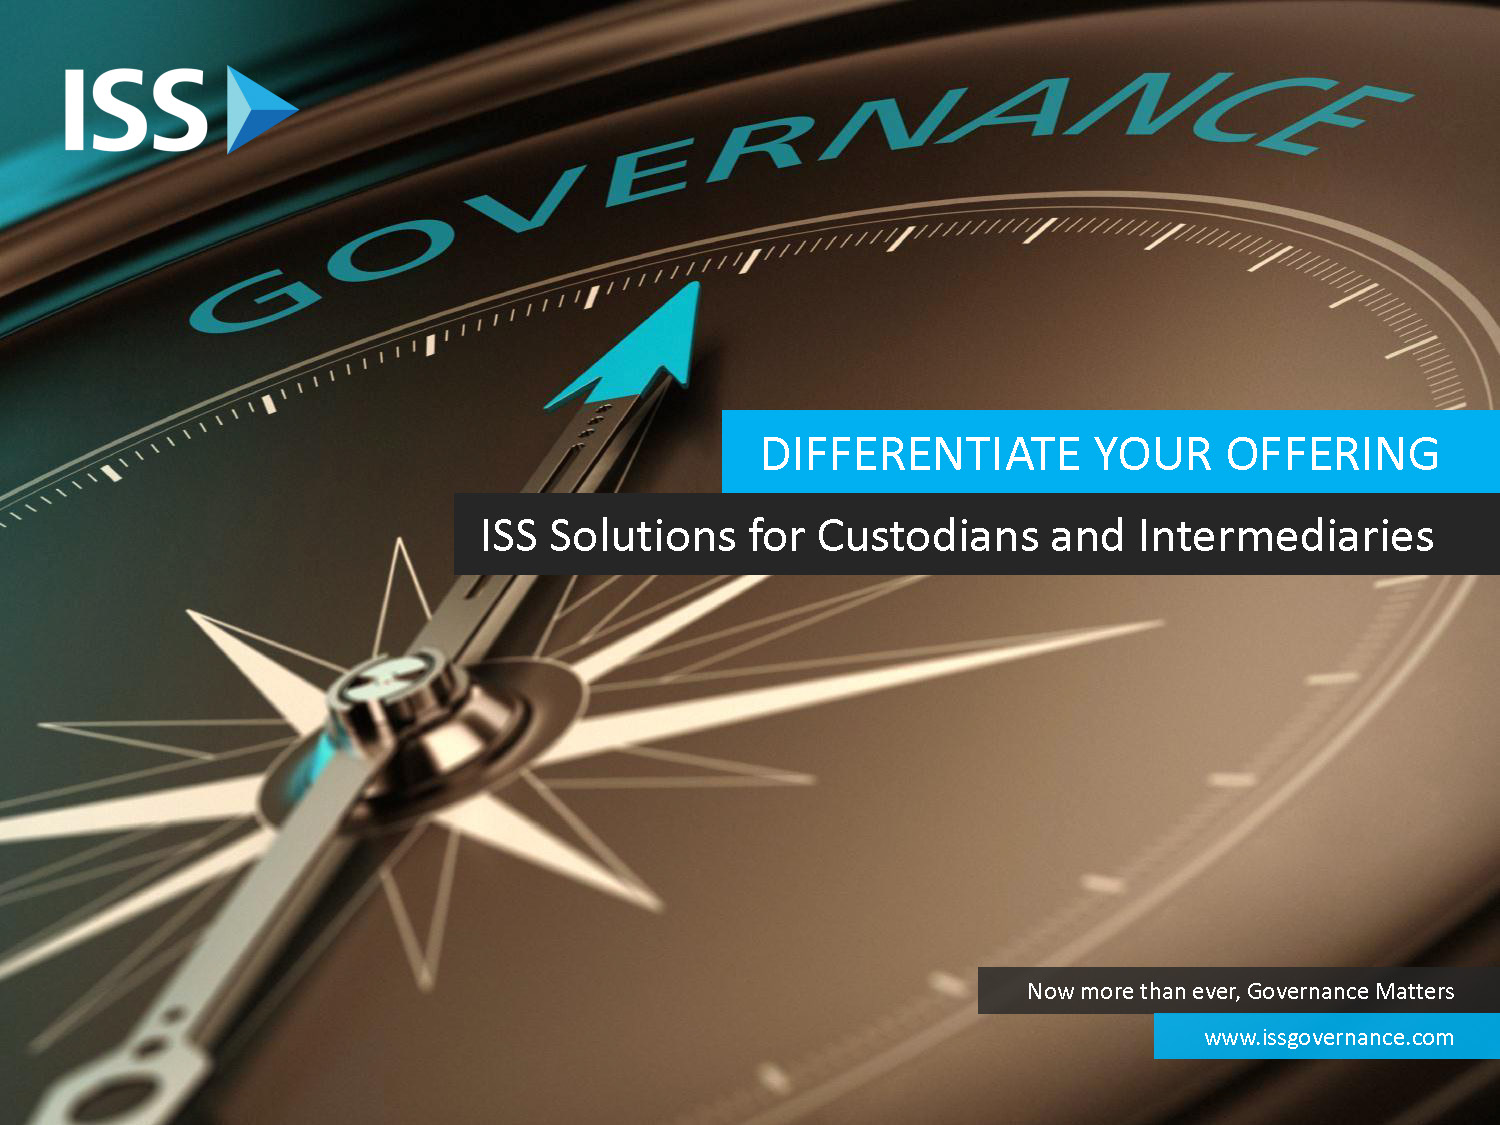 Differentiate Your Offering with ISS Solutions for Custodians and Intermediaries